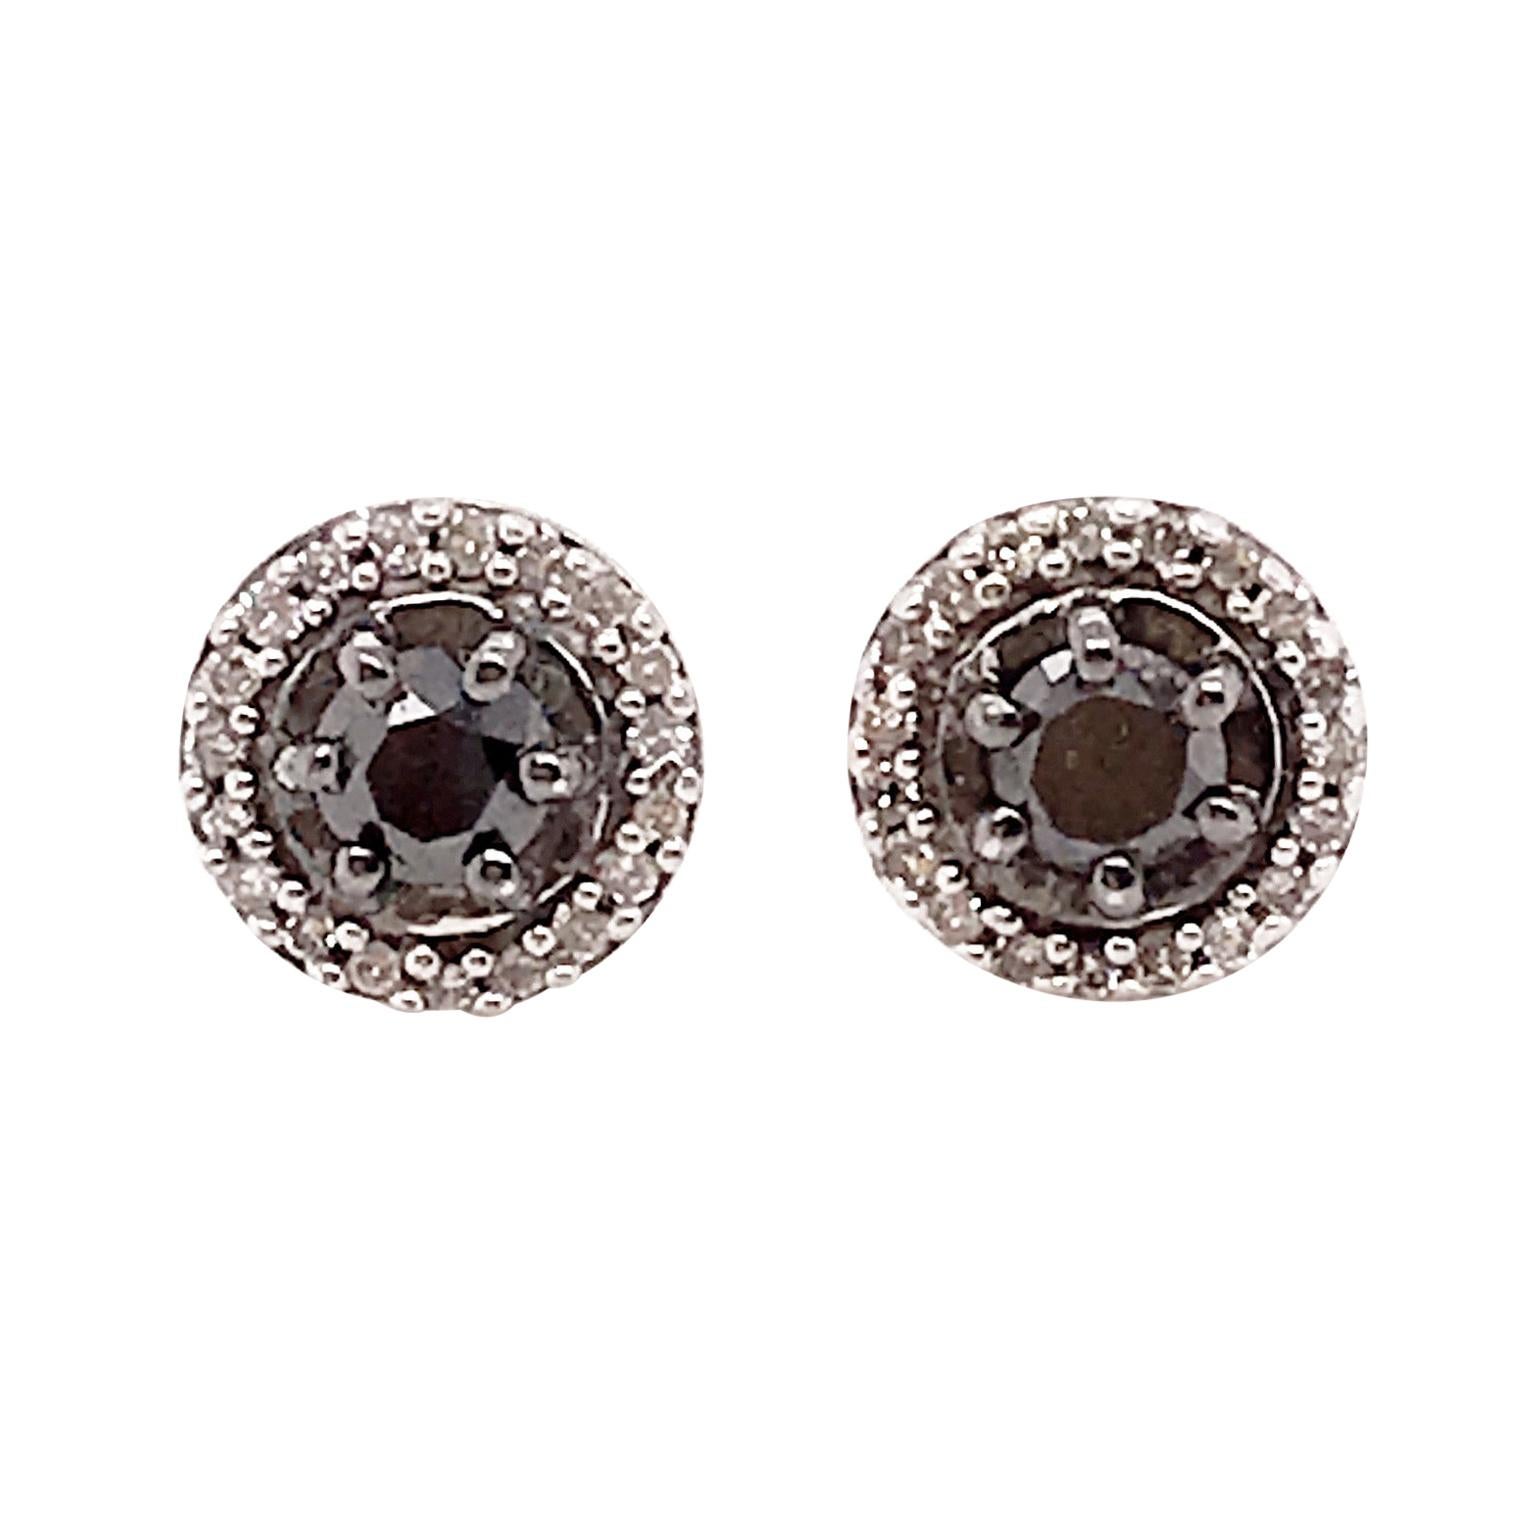 .20 Carat Black Diamond and White Diamond Halo Stud Earrings in Sterling Silver